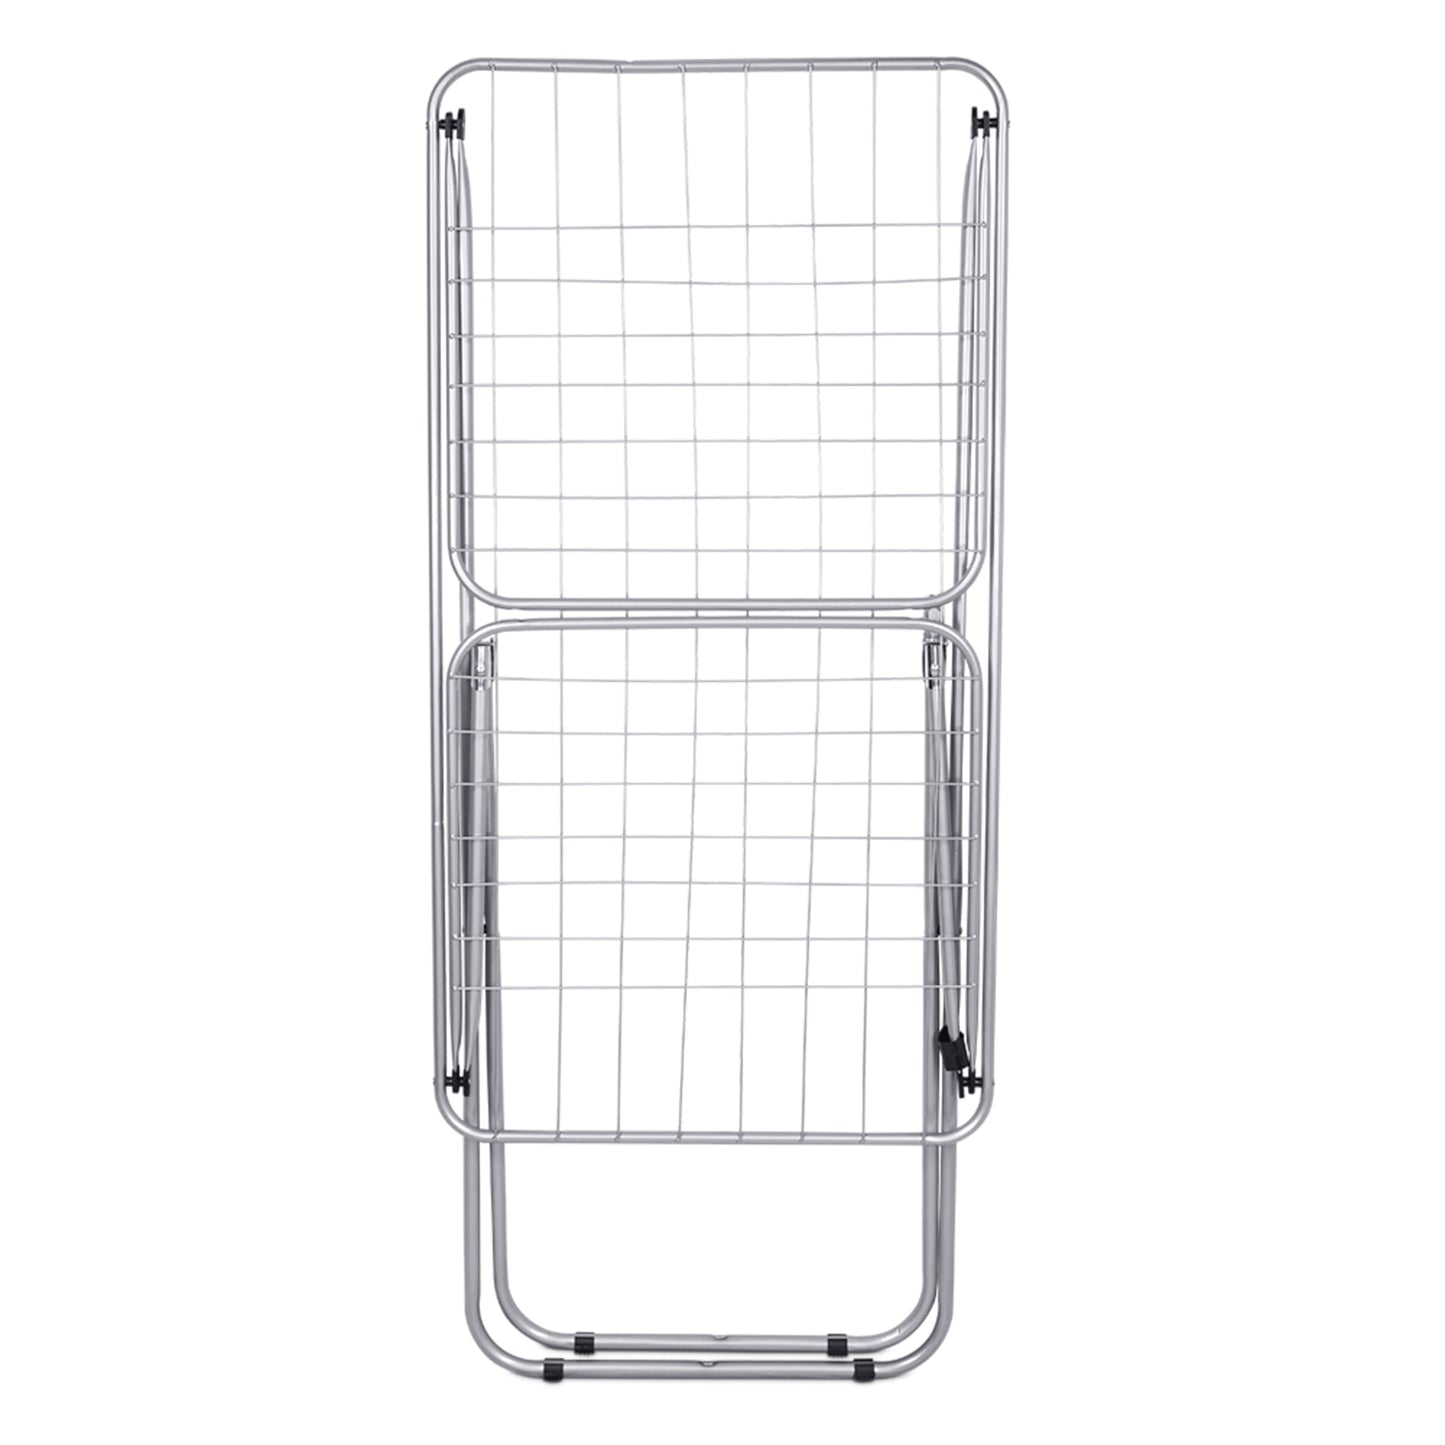 Enamel Coated Steel Clothes Drying Rack